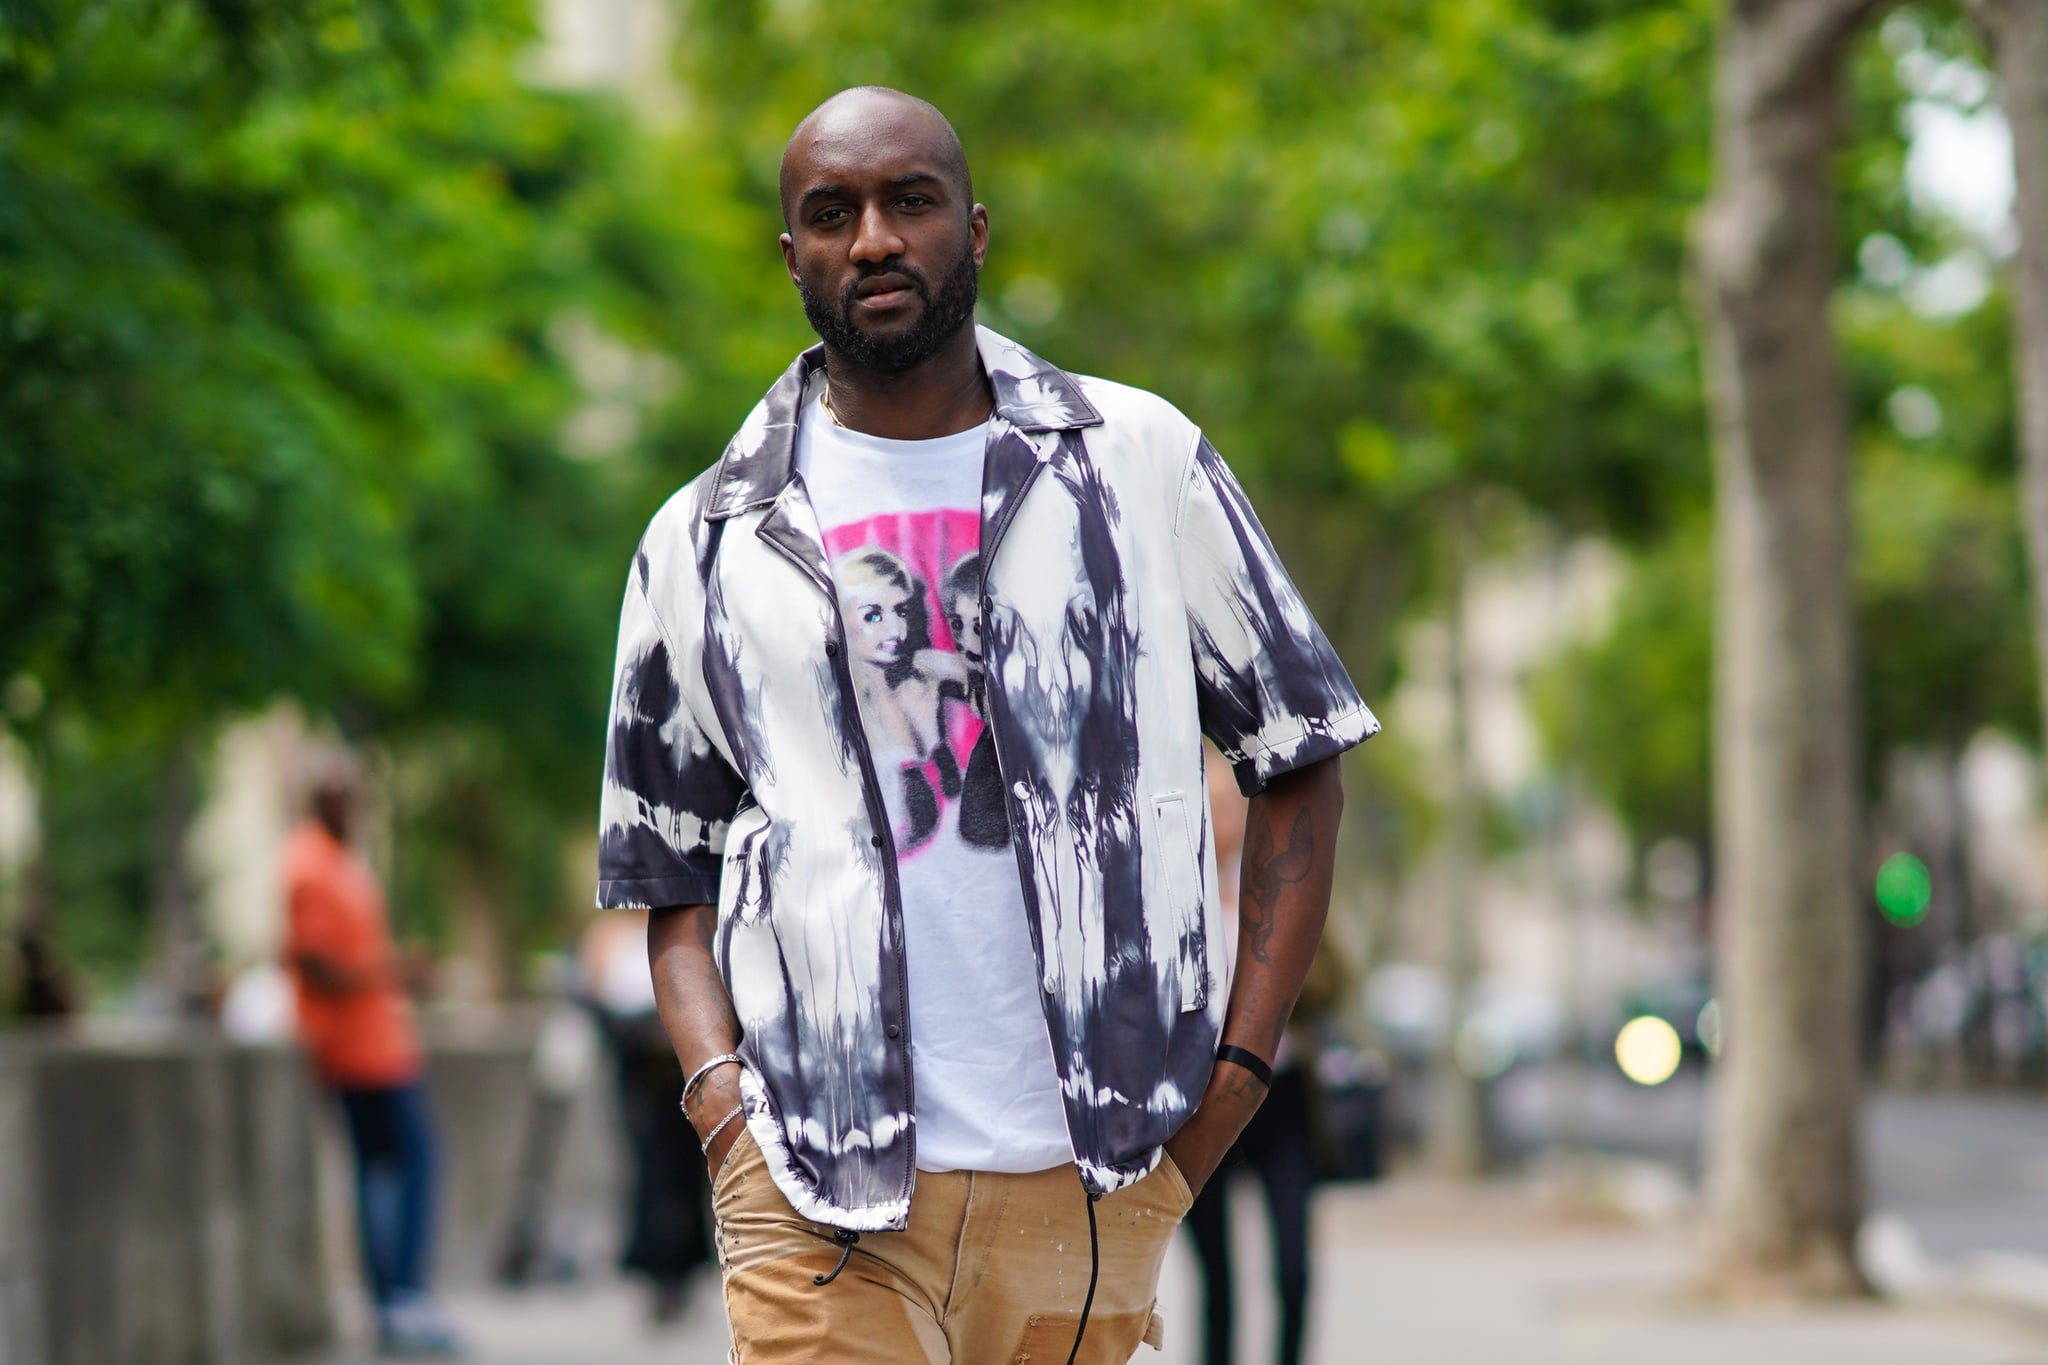 See All the Looks from Virgil Abloh's Final Collection for Louis